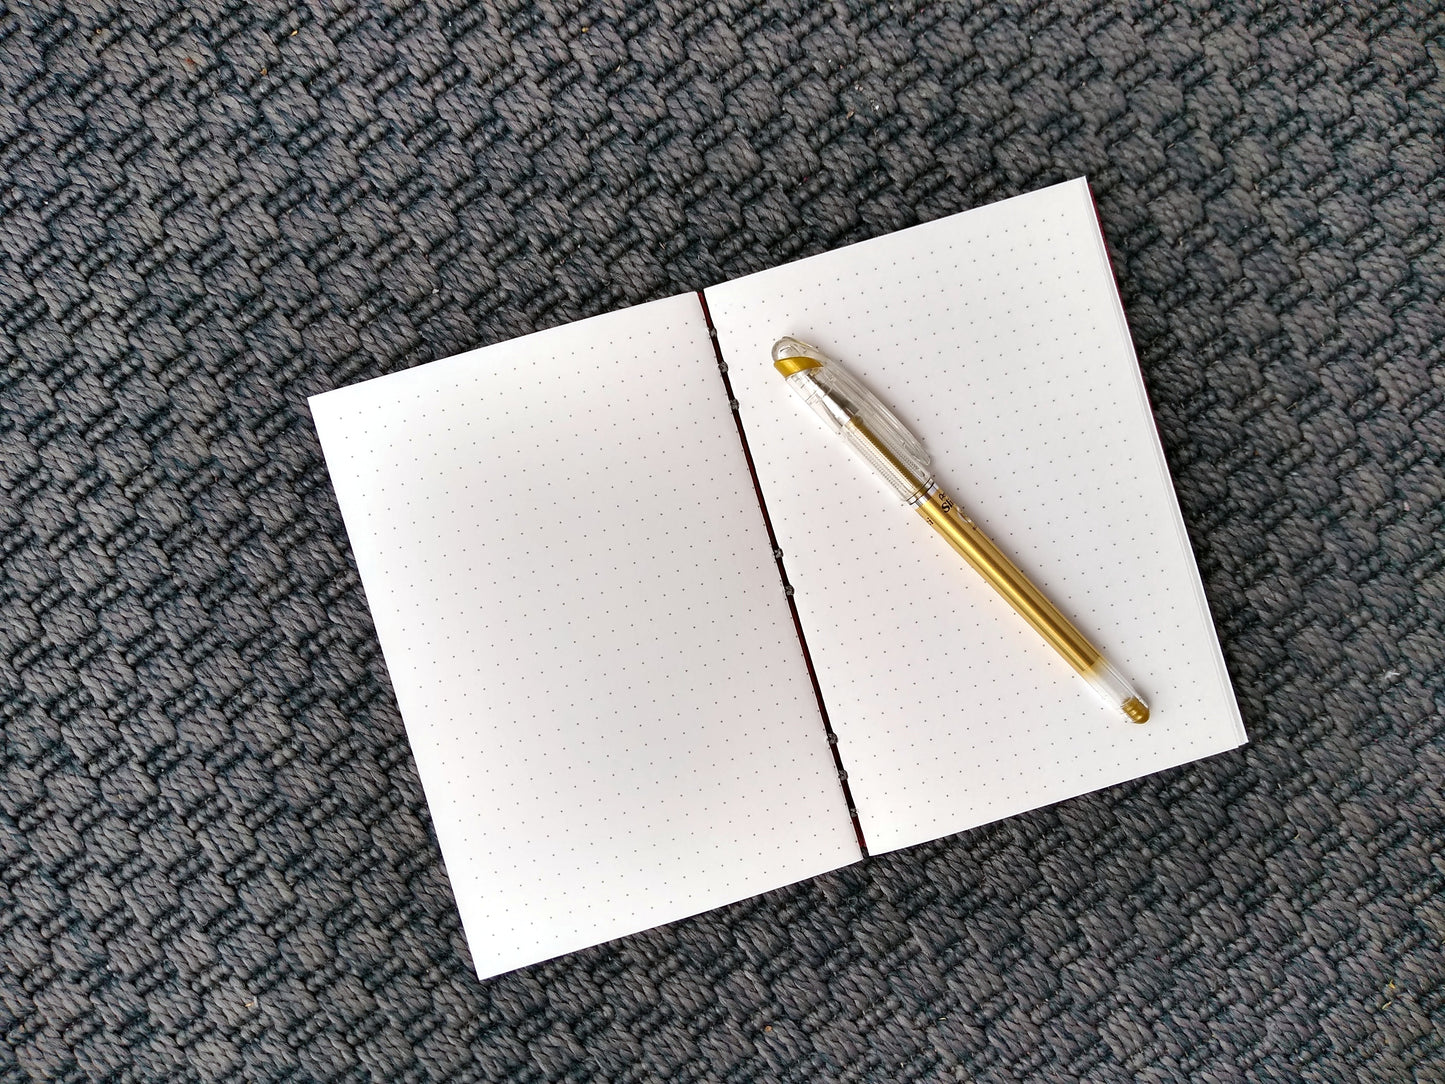 An open journal lays on a grey carpet. The journal has a grey thread connecting the pages at the spine and a gold pen rests across the white pages, printed with a dotted grid.